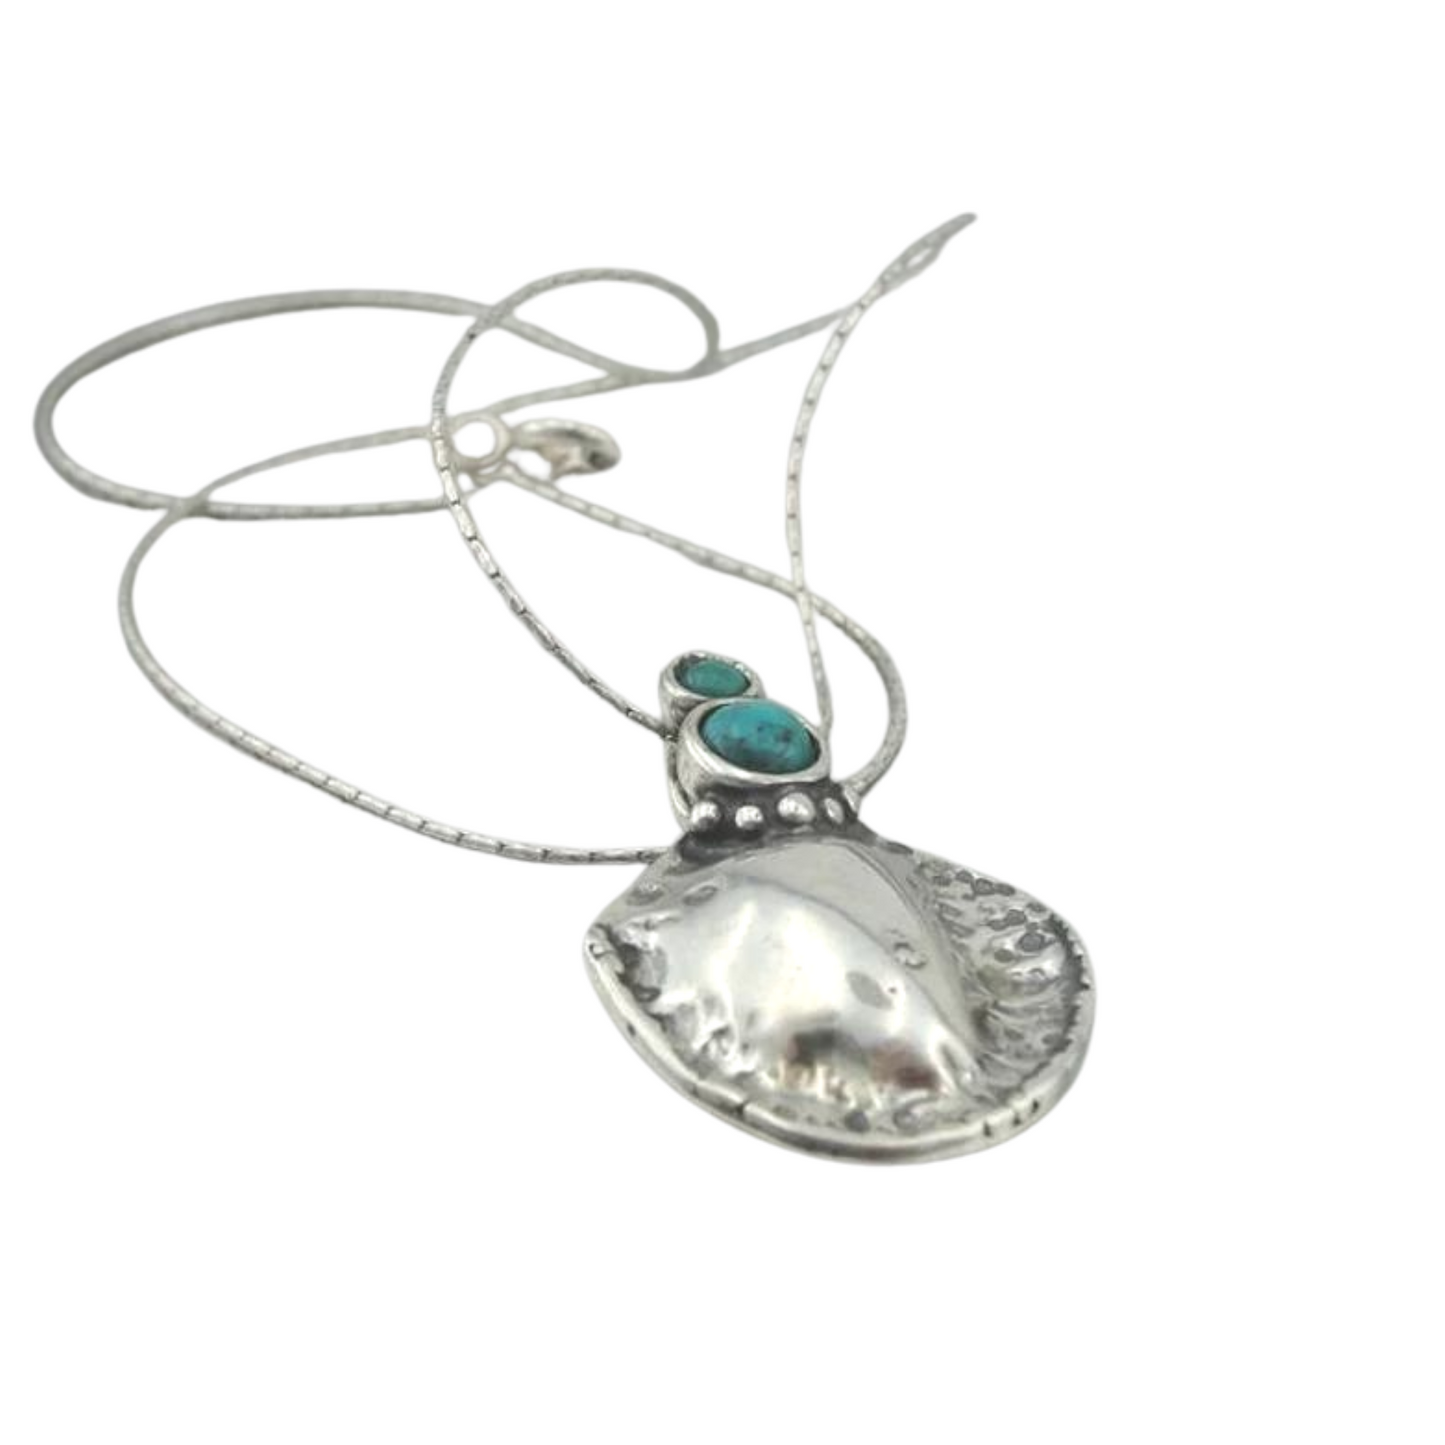 Hadar Jewelry Handmade 925 Sterling Silver Turquoise Chain Pendant (H)